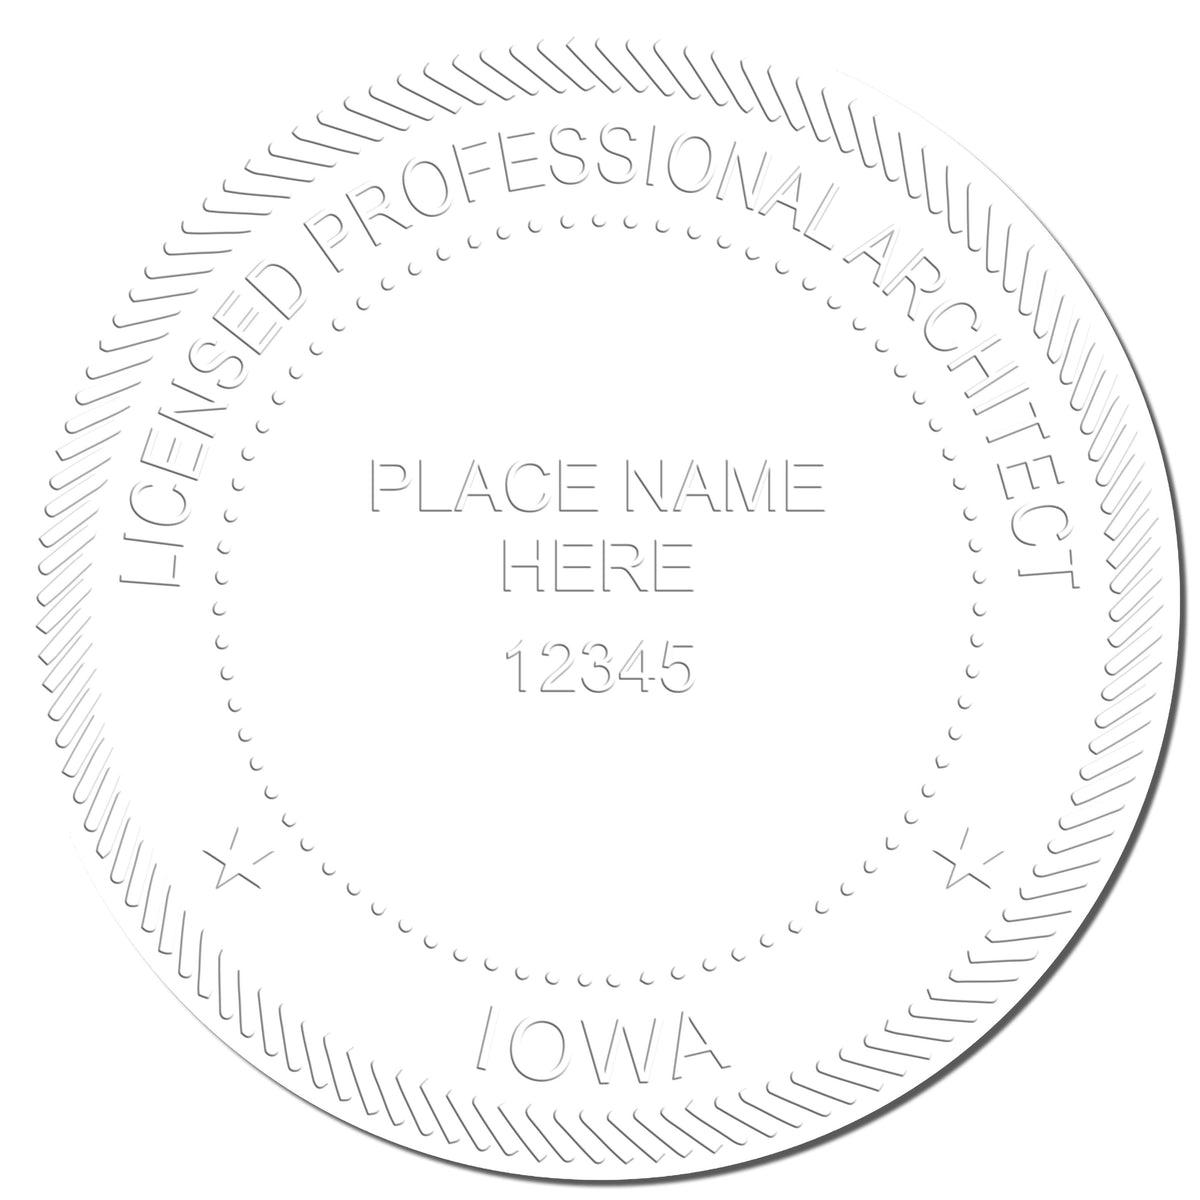 This paper is stamped with a sample imprint of the Gift Iowa Architect Seal, signifying its quality and reliability.